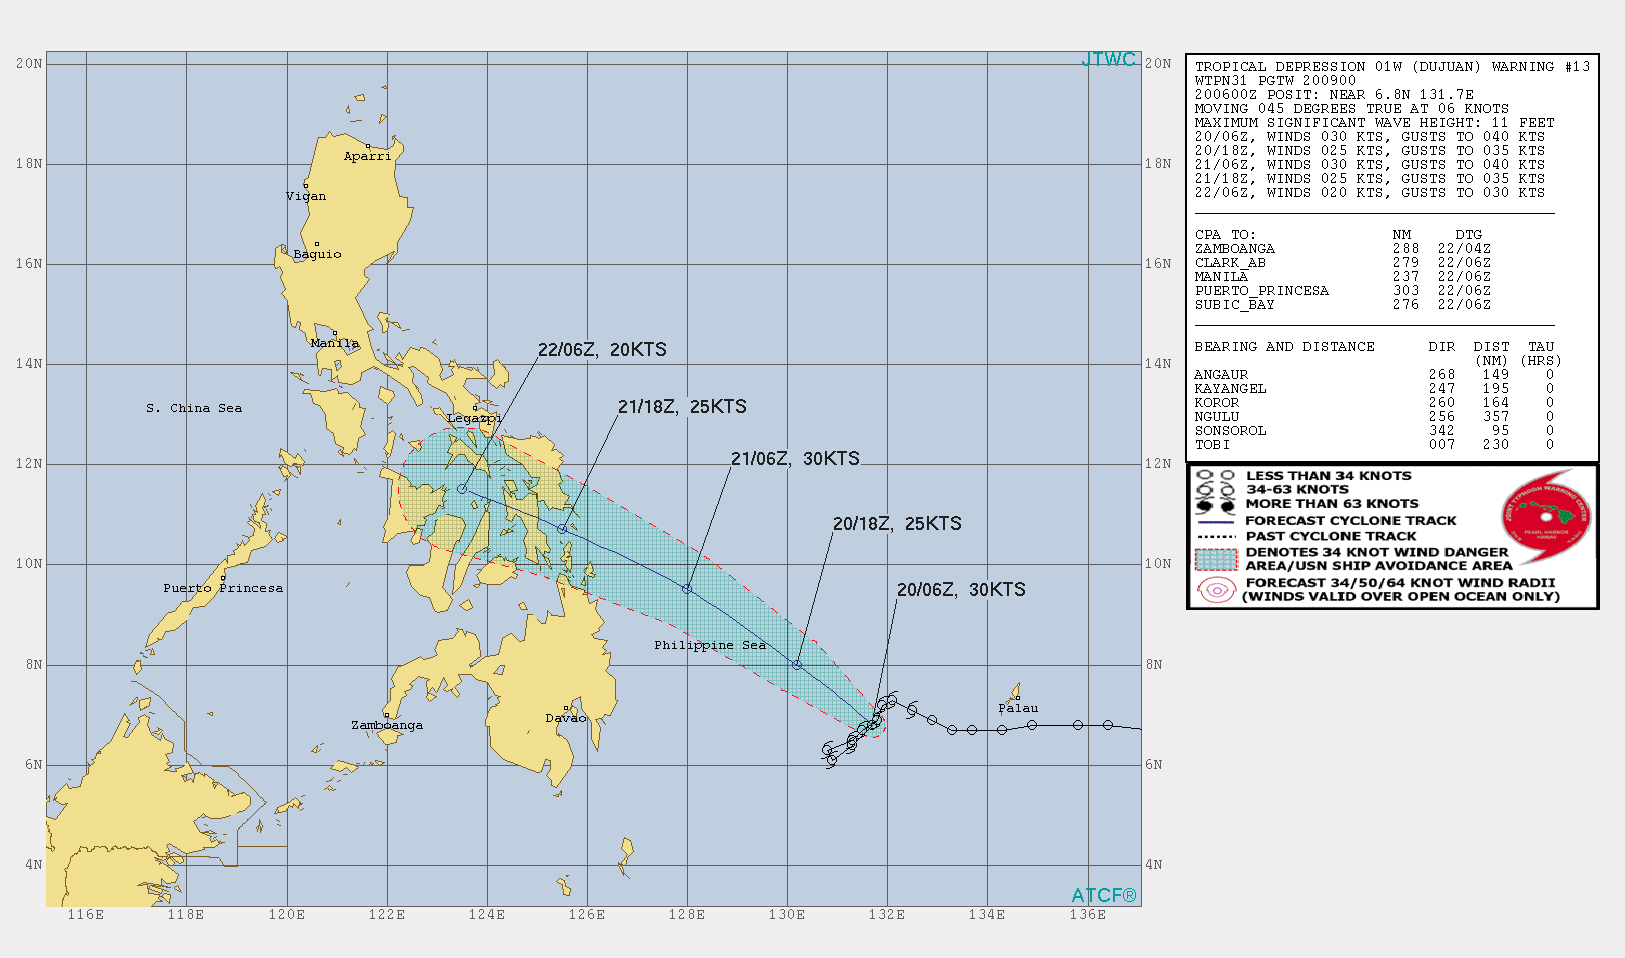 01W(DUJUAN). WARNING 13 ISSUED AT 20/09UTC. ANALYSIS INDICATES WARM (29-30C) ALONG-TRACK SST AND STRONG  WESTWARD AND POLEWARD OUTFLOW ALOFT. ADDITIONALLY, THE WARM MOIST  AIR AHEAD OF THE TD IS OVERRUNNING THE COLD NORTHEASTERLY WIND SURGE  IN THE PHILIPPINE SEA. THIS COMBINATION IS FUELING THE EXPLOSIVE  DEEP MAIN CONVECTION EVEN THOUGH IT IS DISPLACED BY HIGH (30KT)  SOUTHEASTERLY VERTICAL WIND SHEAR. THE NET EFFECT IS AN  OVERALL UNFAVORABLE ENVIRONMENT. THE CYCLONE IS LODGED JUST TO THE  SOUTH OF A COL BETWEEN THE DEEP LAYERED SUBTROPICAL RIDGES (STR) TO  THE NORTHEAST AND NORTHWEST. THE FORECAST IS NOW TERMINATED AT TAU 48 IN ANTICIPATION OF AN  EARLIER DISSIPATION.TD 01W WILL SLOWLY TRACK NORTHWESTWARD AS THE STR TO THE  NORTHEAST ASSUMES STEERING, MAKING LANDFALL OVER LEYTE, PHILIPPINES,  AFTER 36H. THE HARSH ENVIRONMENT, MOSTLY DUE TO THE STRONG WIND SHEAR,  WILL FURTHER WEAKEN THE TD TO 25KNOTS BY 12H. AFTERWARD, AS THE  STORM MOTION BECOMES MORE IN-PHASE WITH THE UPPER LEVEL WIND FLOW  AND AS THE NORTHEAST COLD SURGE ABATES, THE WIND SHEAR WILL RELAX A BIT AND  ALLOW A SLIGHT INTENSIFICATION TO 30KNOTS BY 24H. AFTERWARD, LAND  INTERACTION WILL GRADUALLY ERODE THE TD TO DISSIPATION BY 48H.